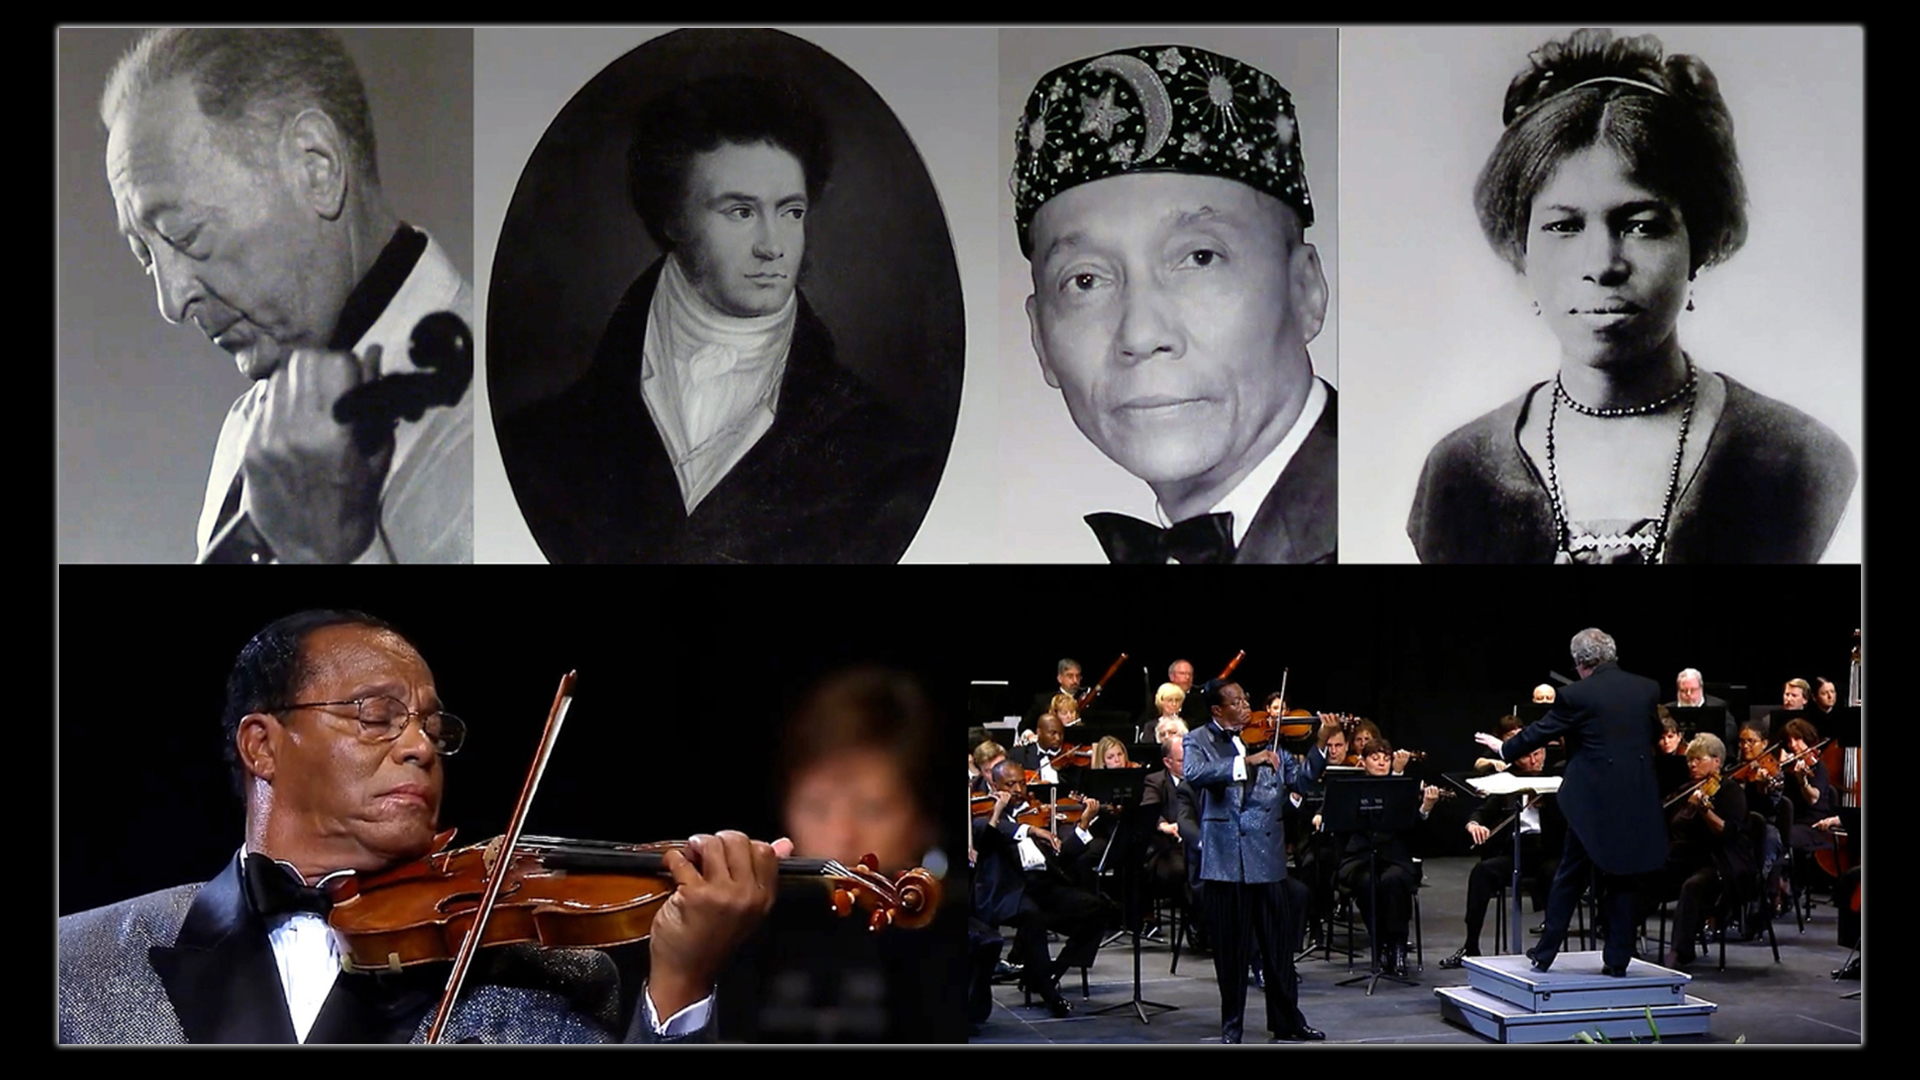 Beethoven Violin Concerto Performed by Minister Louis Farrakhan